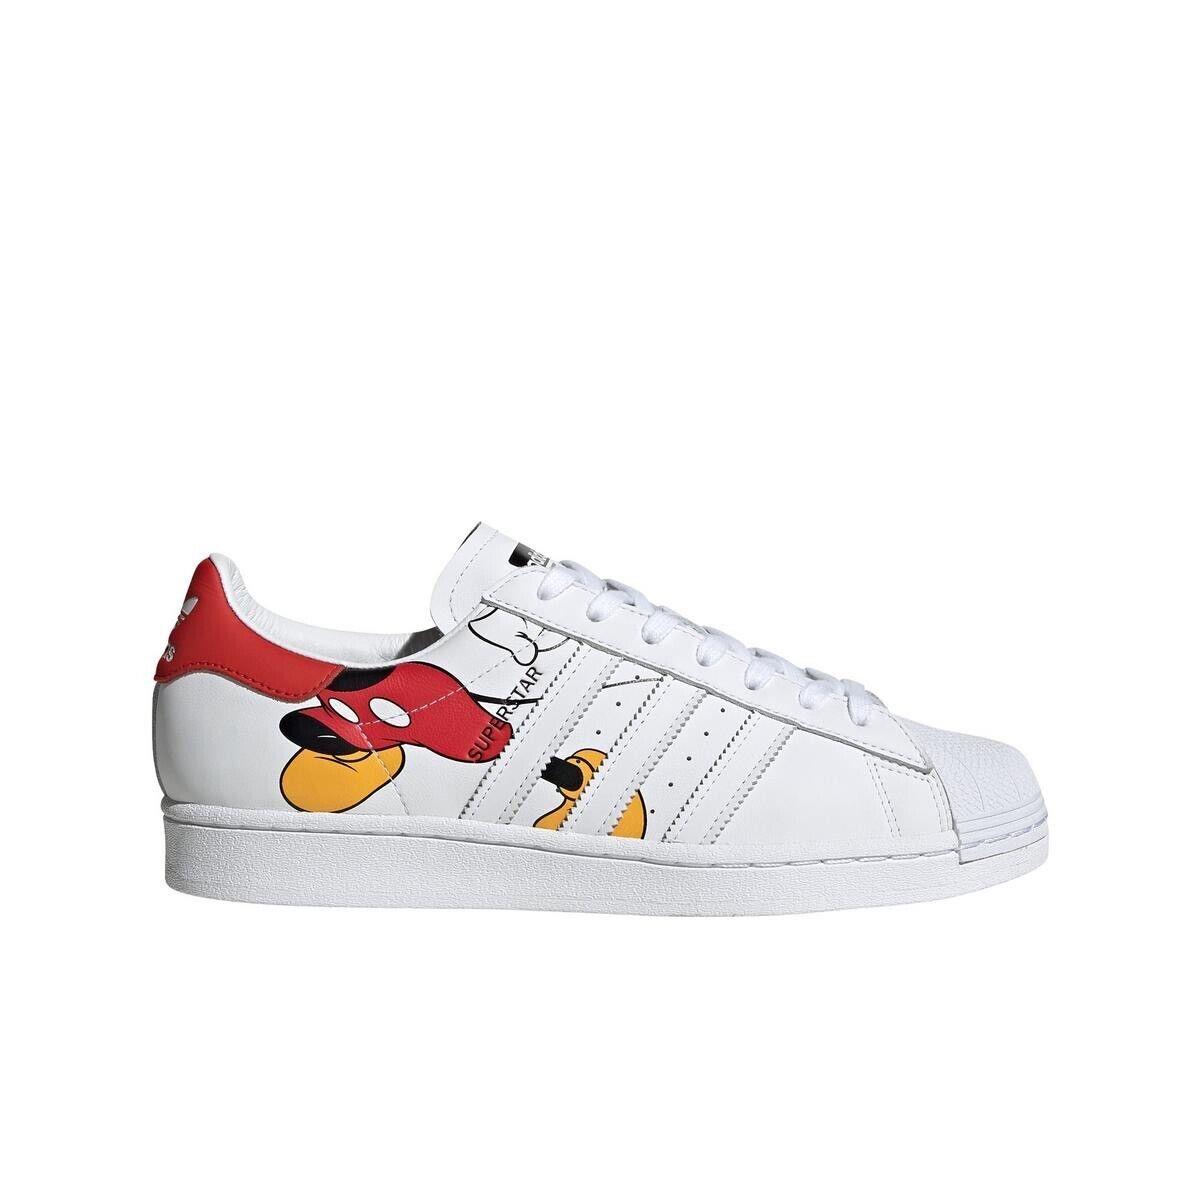 Mens Adidas Superstar Mickey Mouse Disney Shoes Size 12 White Black Red FW2901